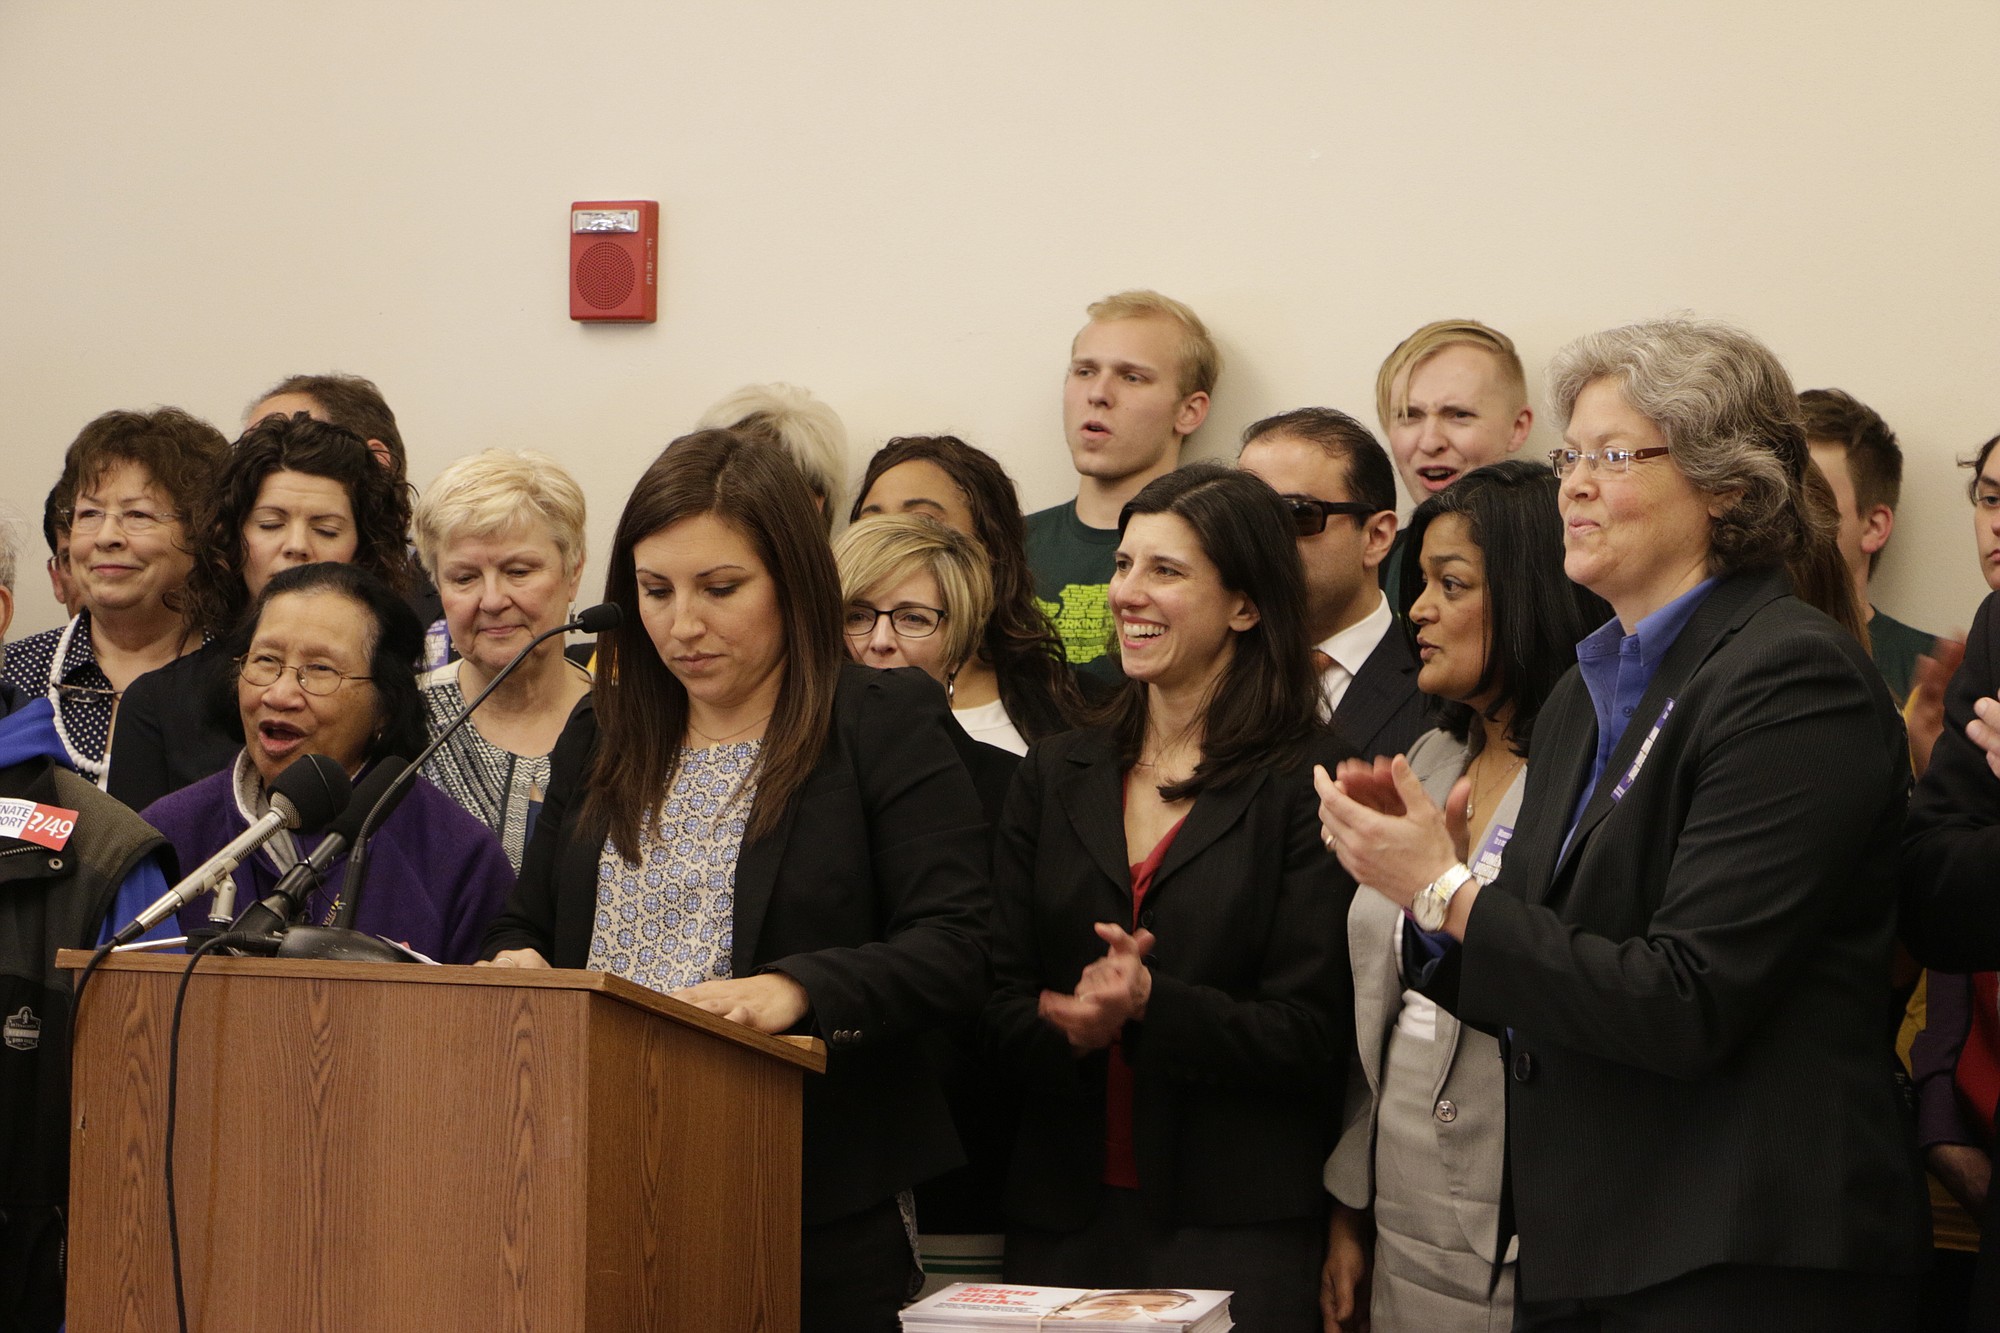 Teresa Mosqueda of the Washington State Labor Council, at podium, is joined by lawmakers and other supporters at a news conference in Olympia on Monday before a hearing on a bill to raise the state's minimum wage to $12 an hour over the next four years.